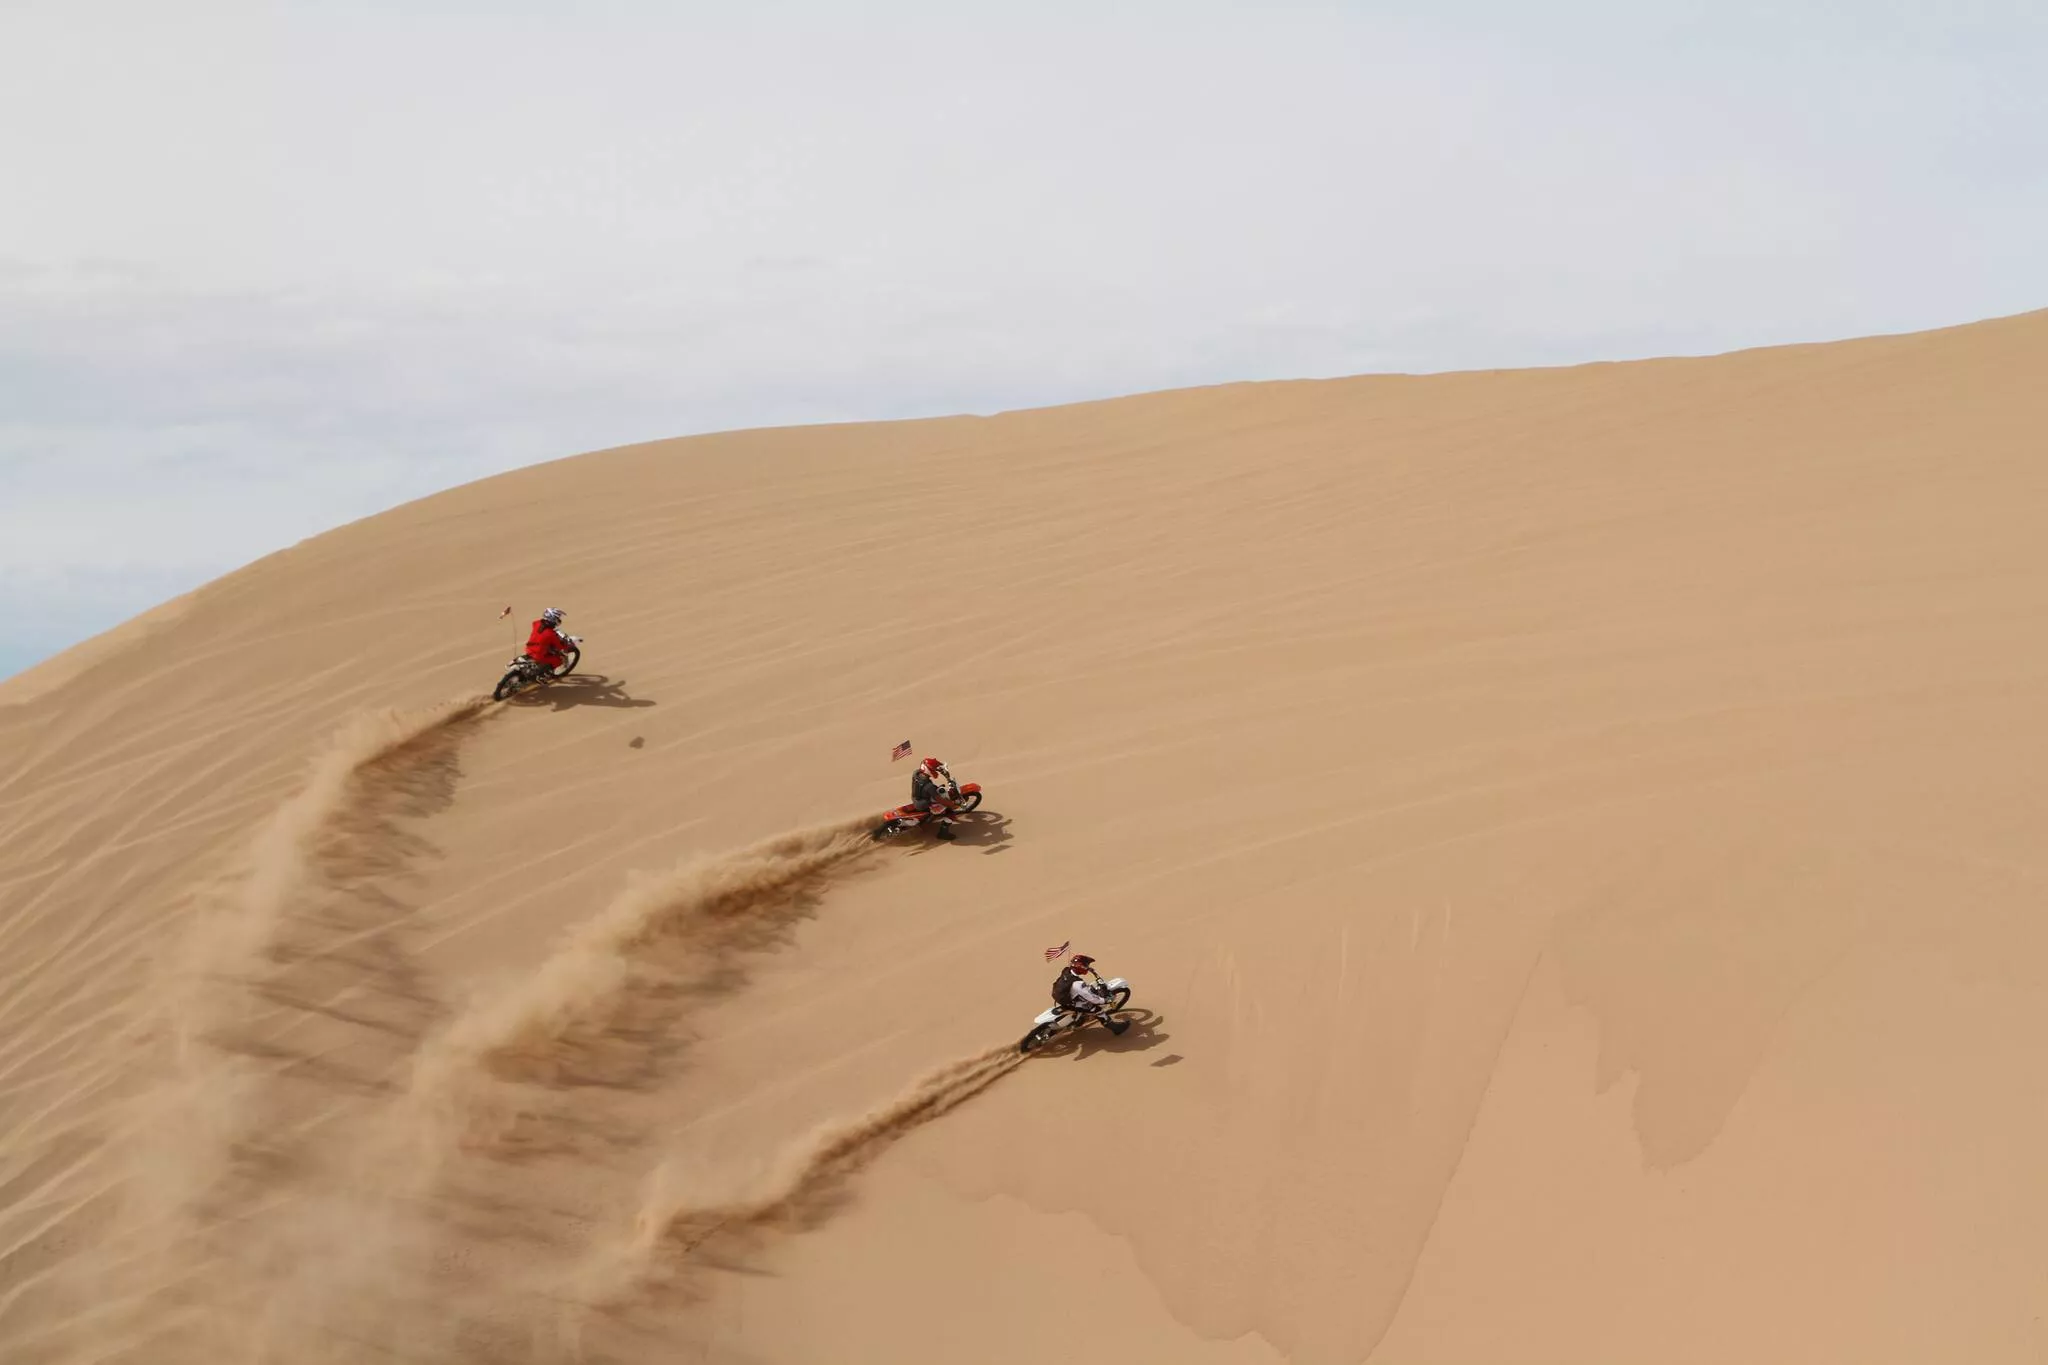 Oceano Dunes State Vehicular Recreation Area in USA, North America | Deserts,Motorcycles,ATVs - Rated 3.9